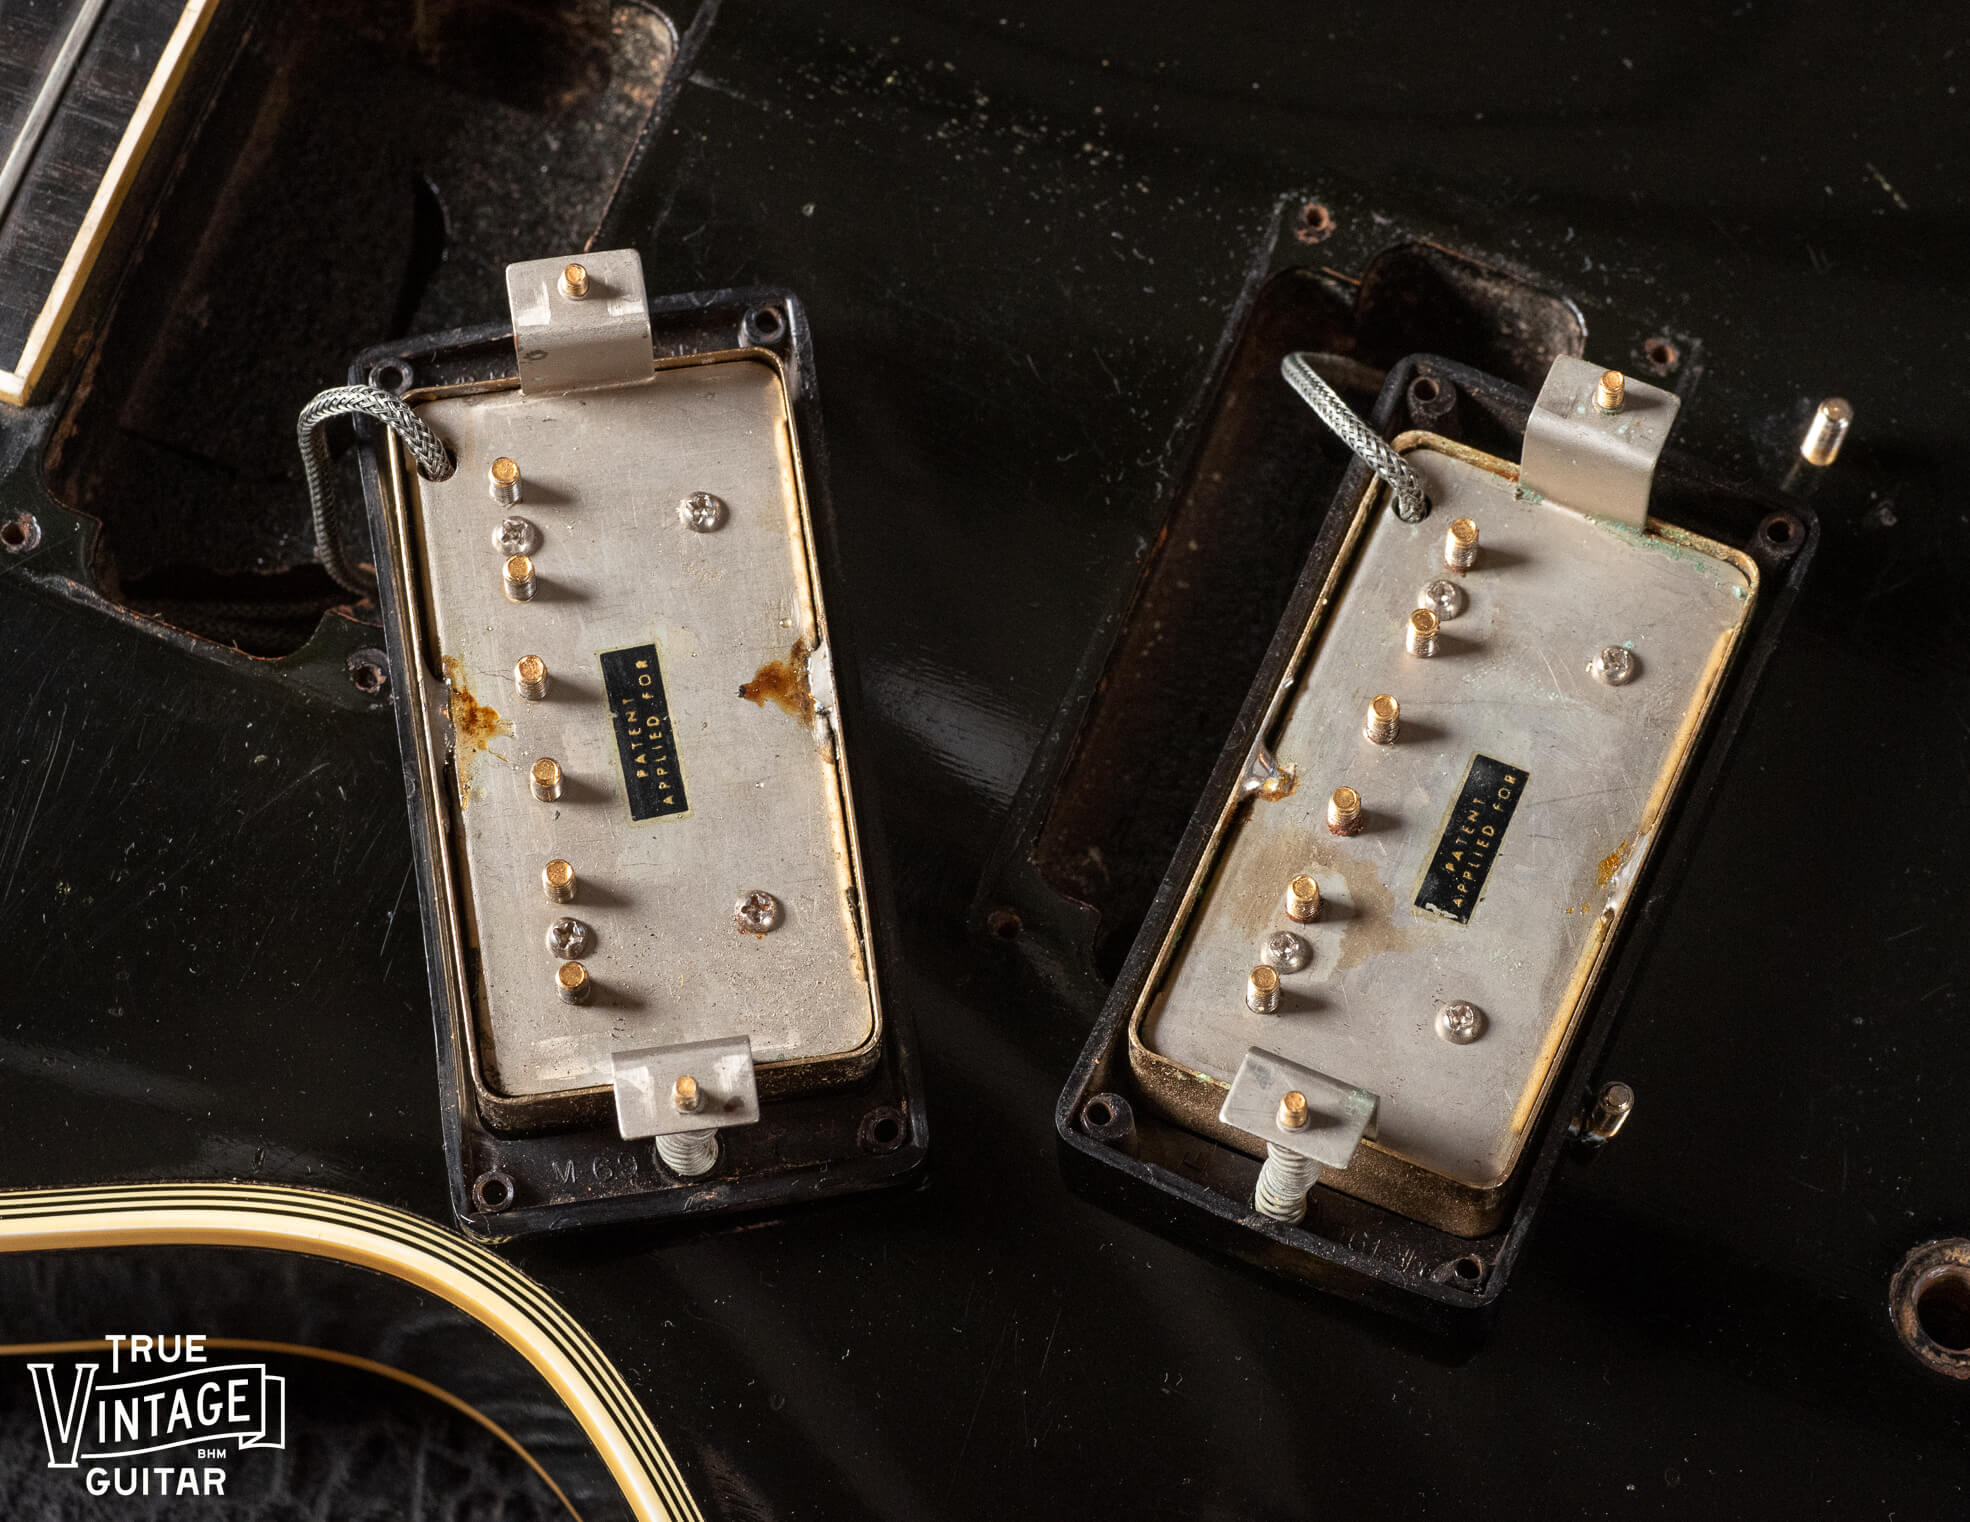 Gibson PAF Humbucking pickups from 1958